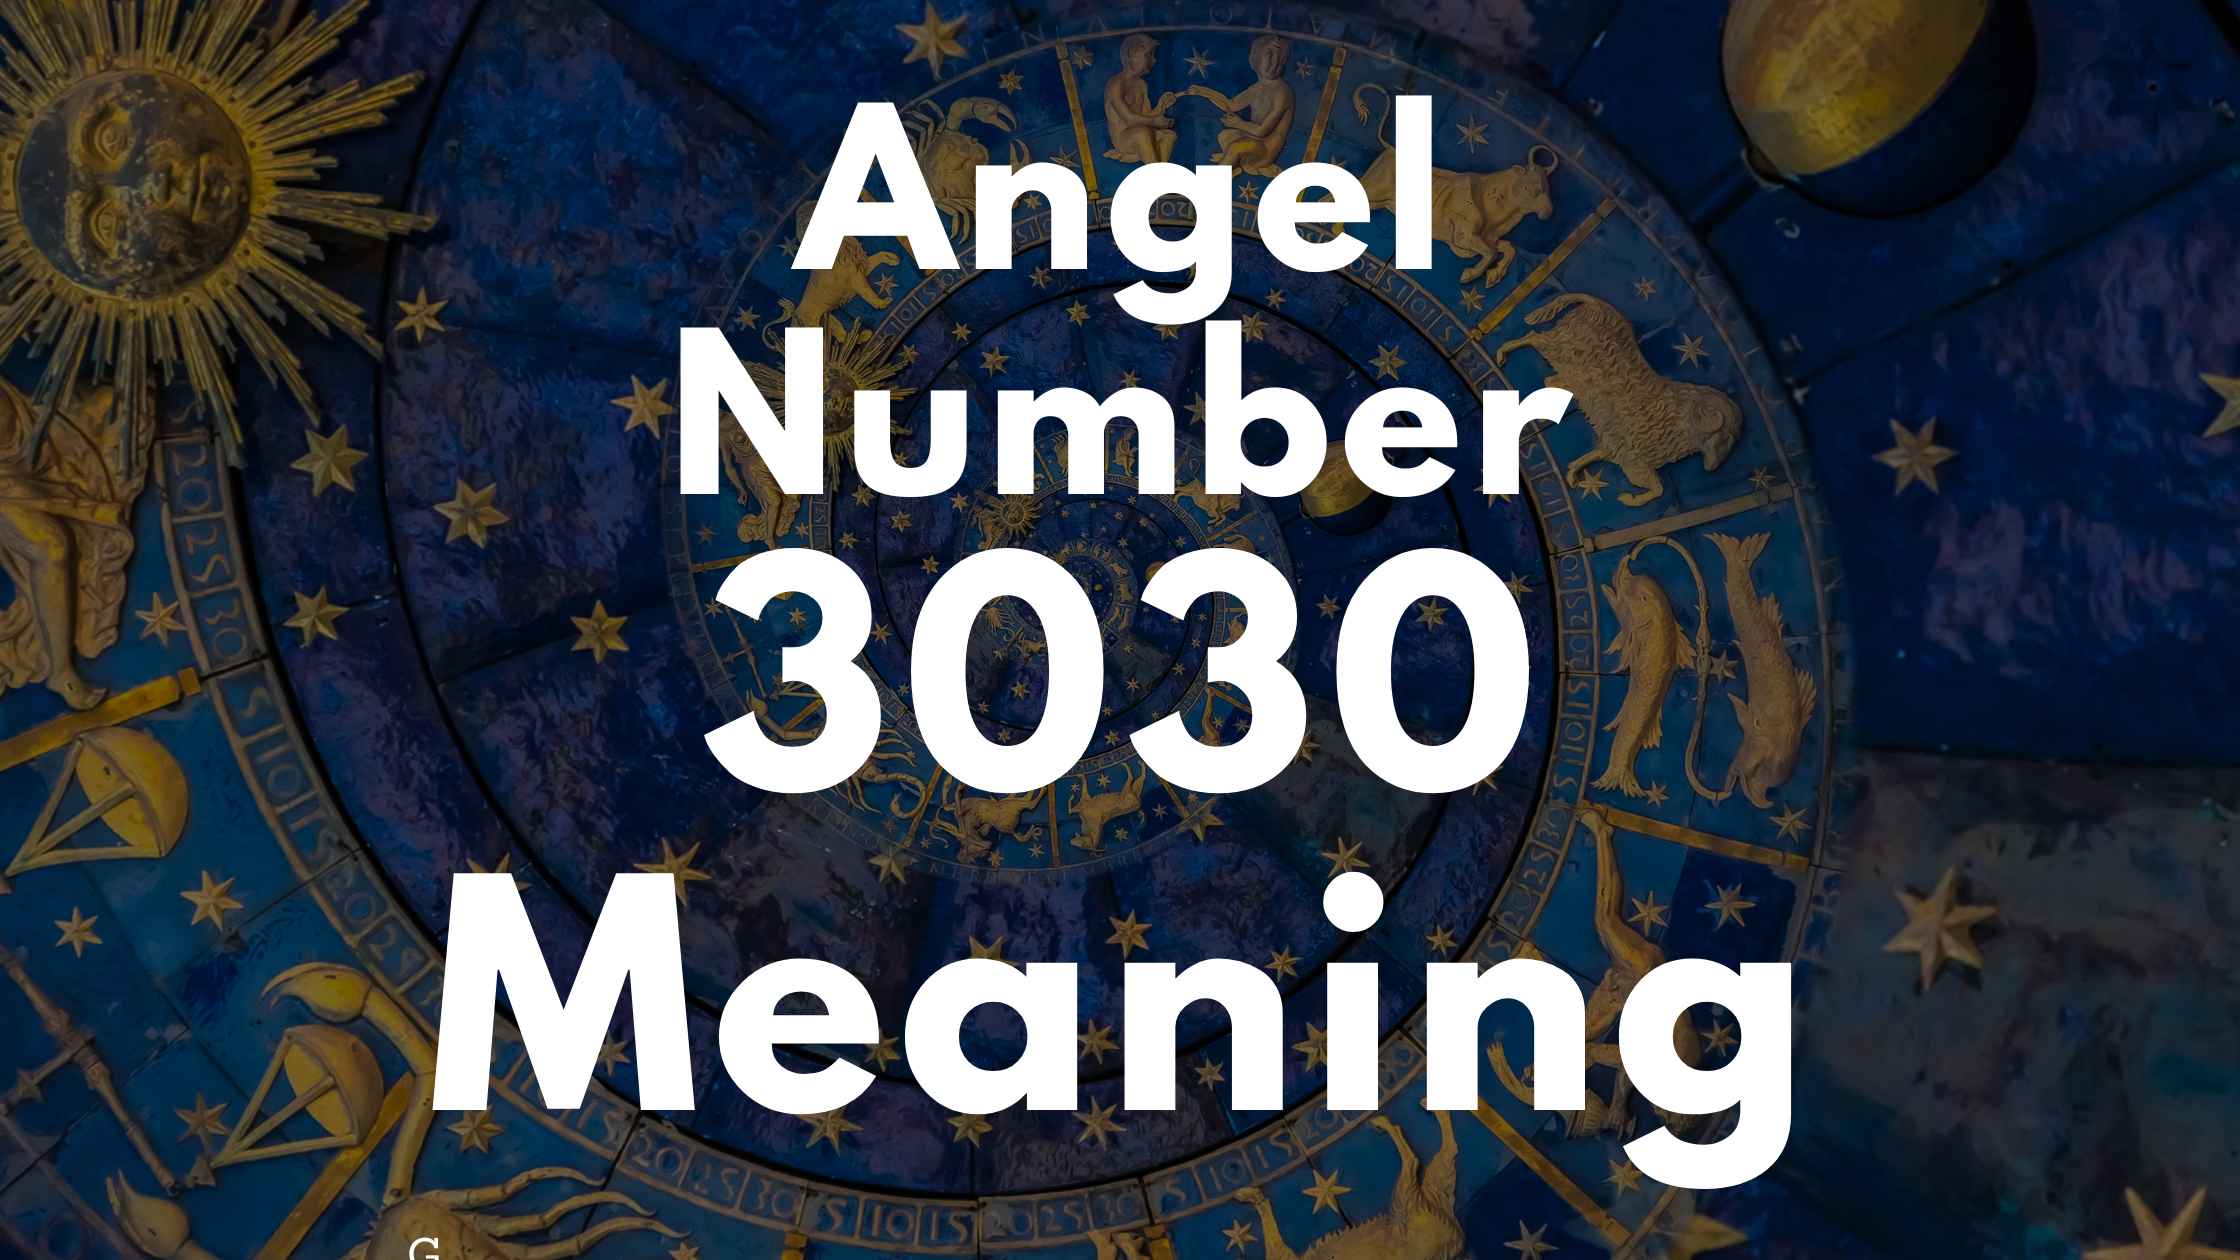 Angel Number 3030 Spiritual Meaning, Symbolism, and Significance